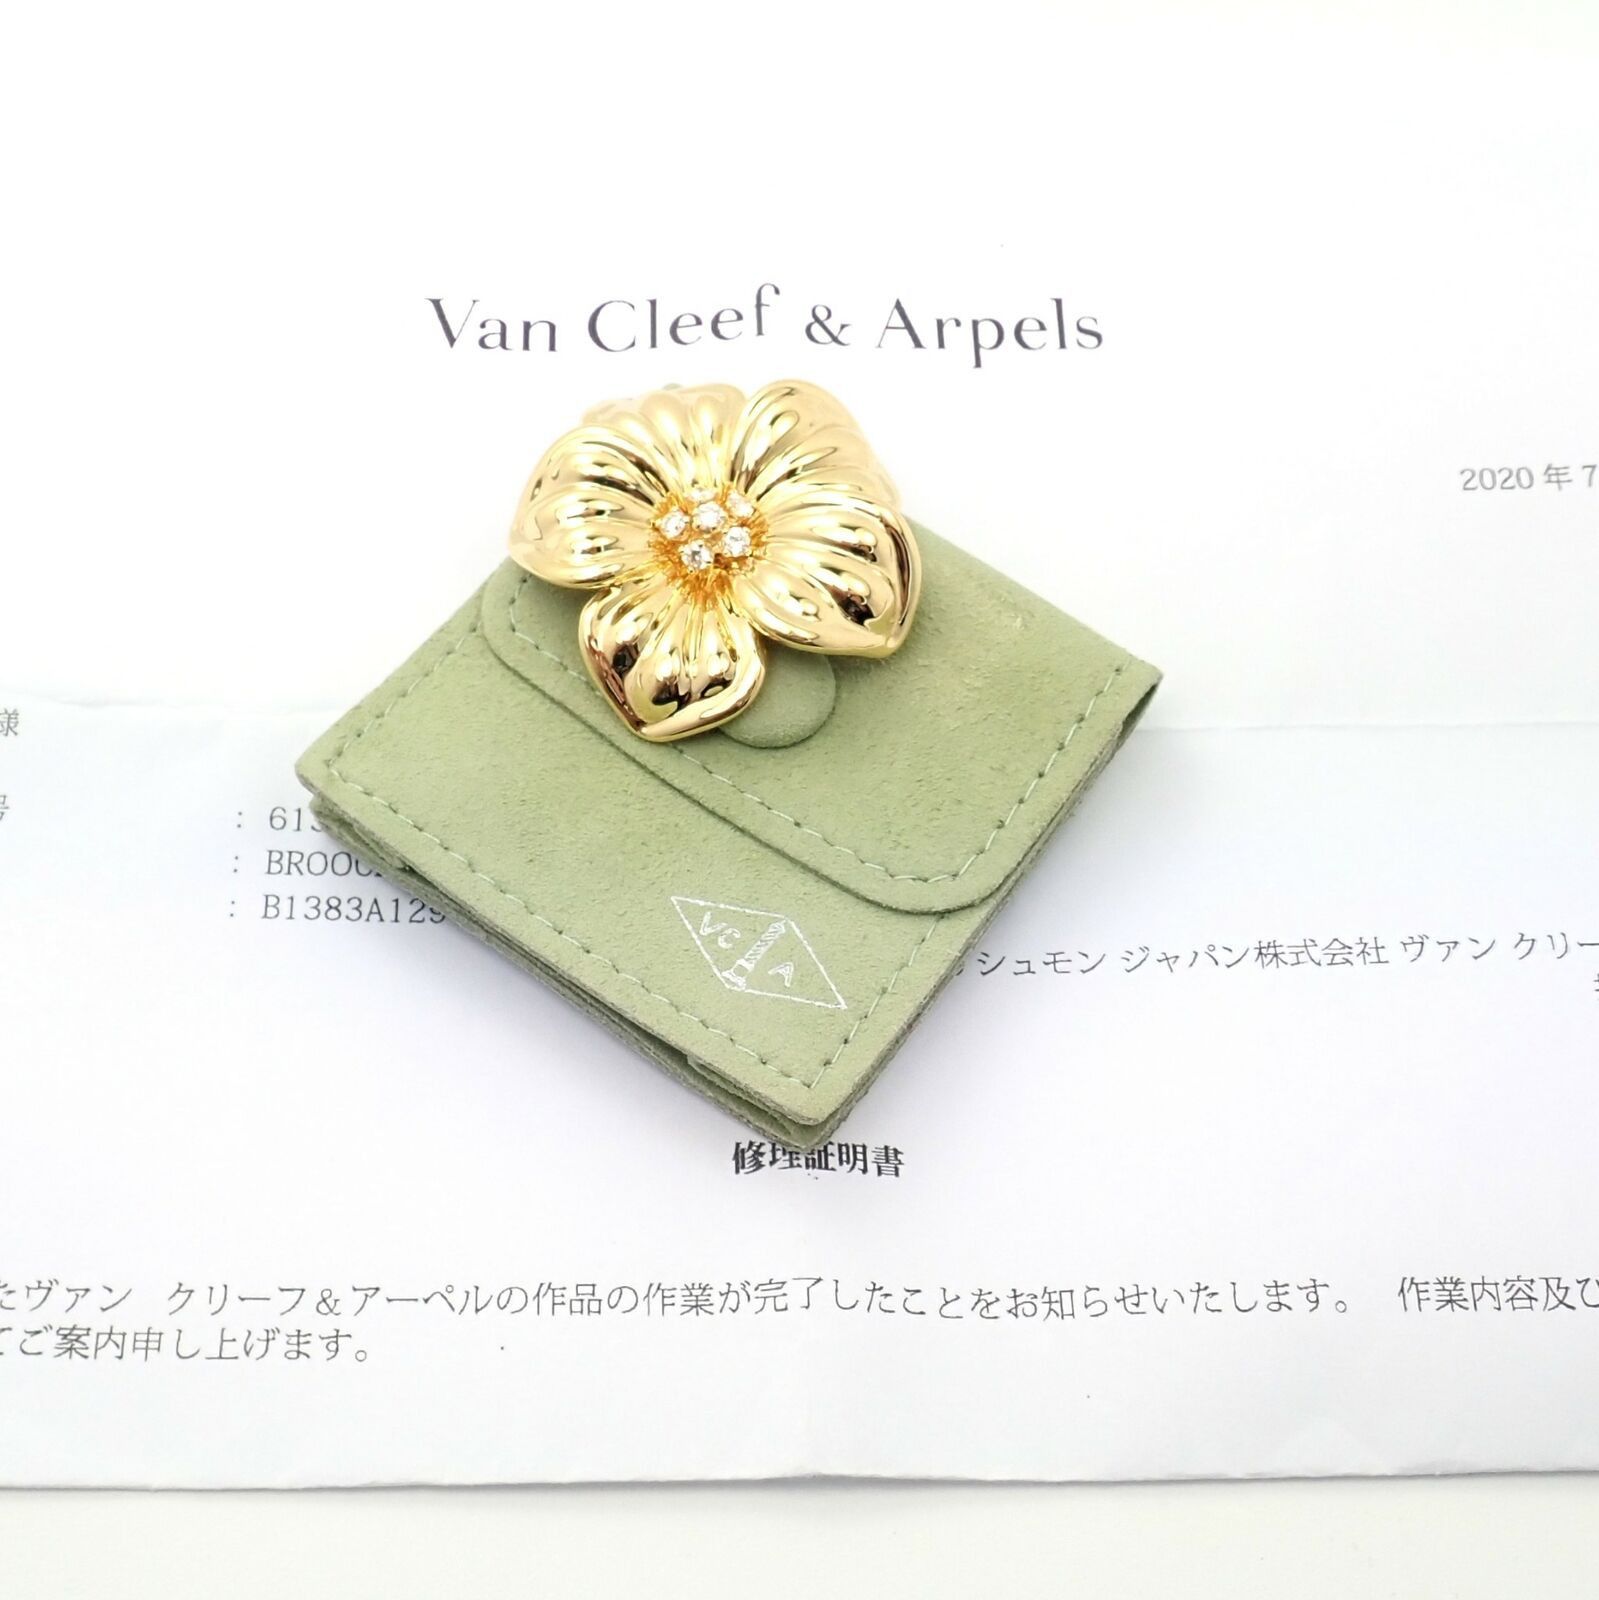 Van Cleef & Arpels Diamond 18k Yellow Gold Magnolia Flower Pin Brooch Size ONE SIZE - 2 Preview